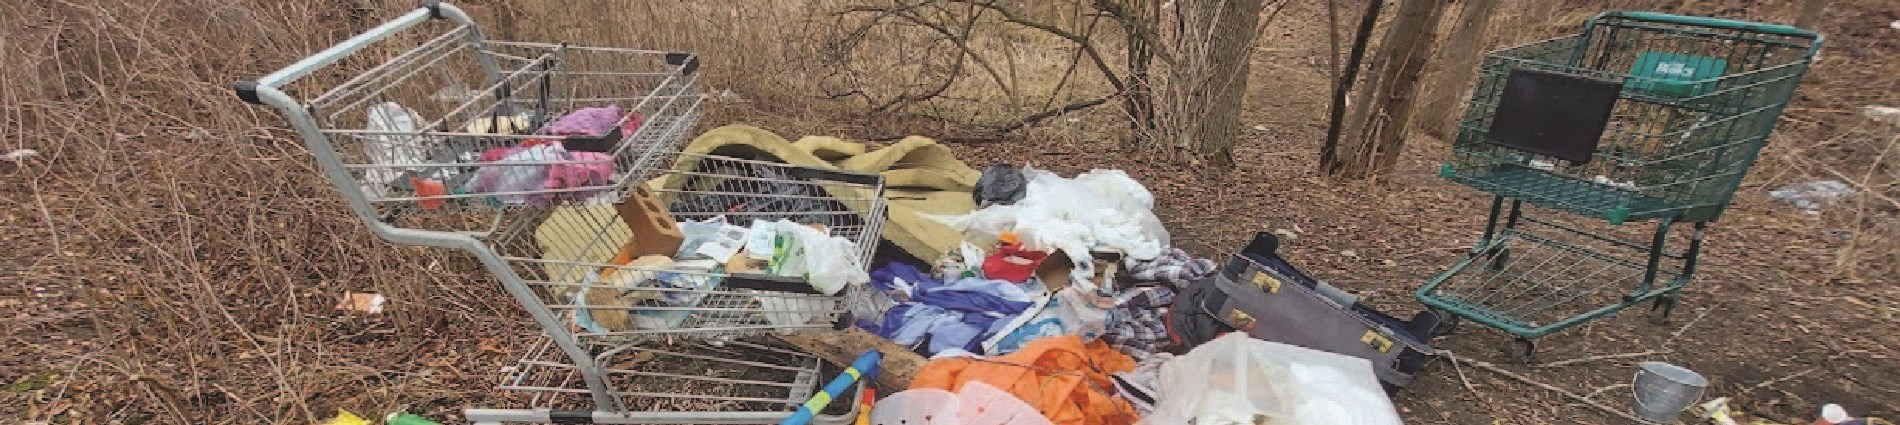 Example of an illegal dump site with household items and shopping carts